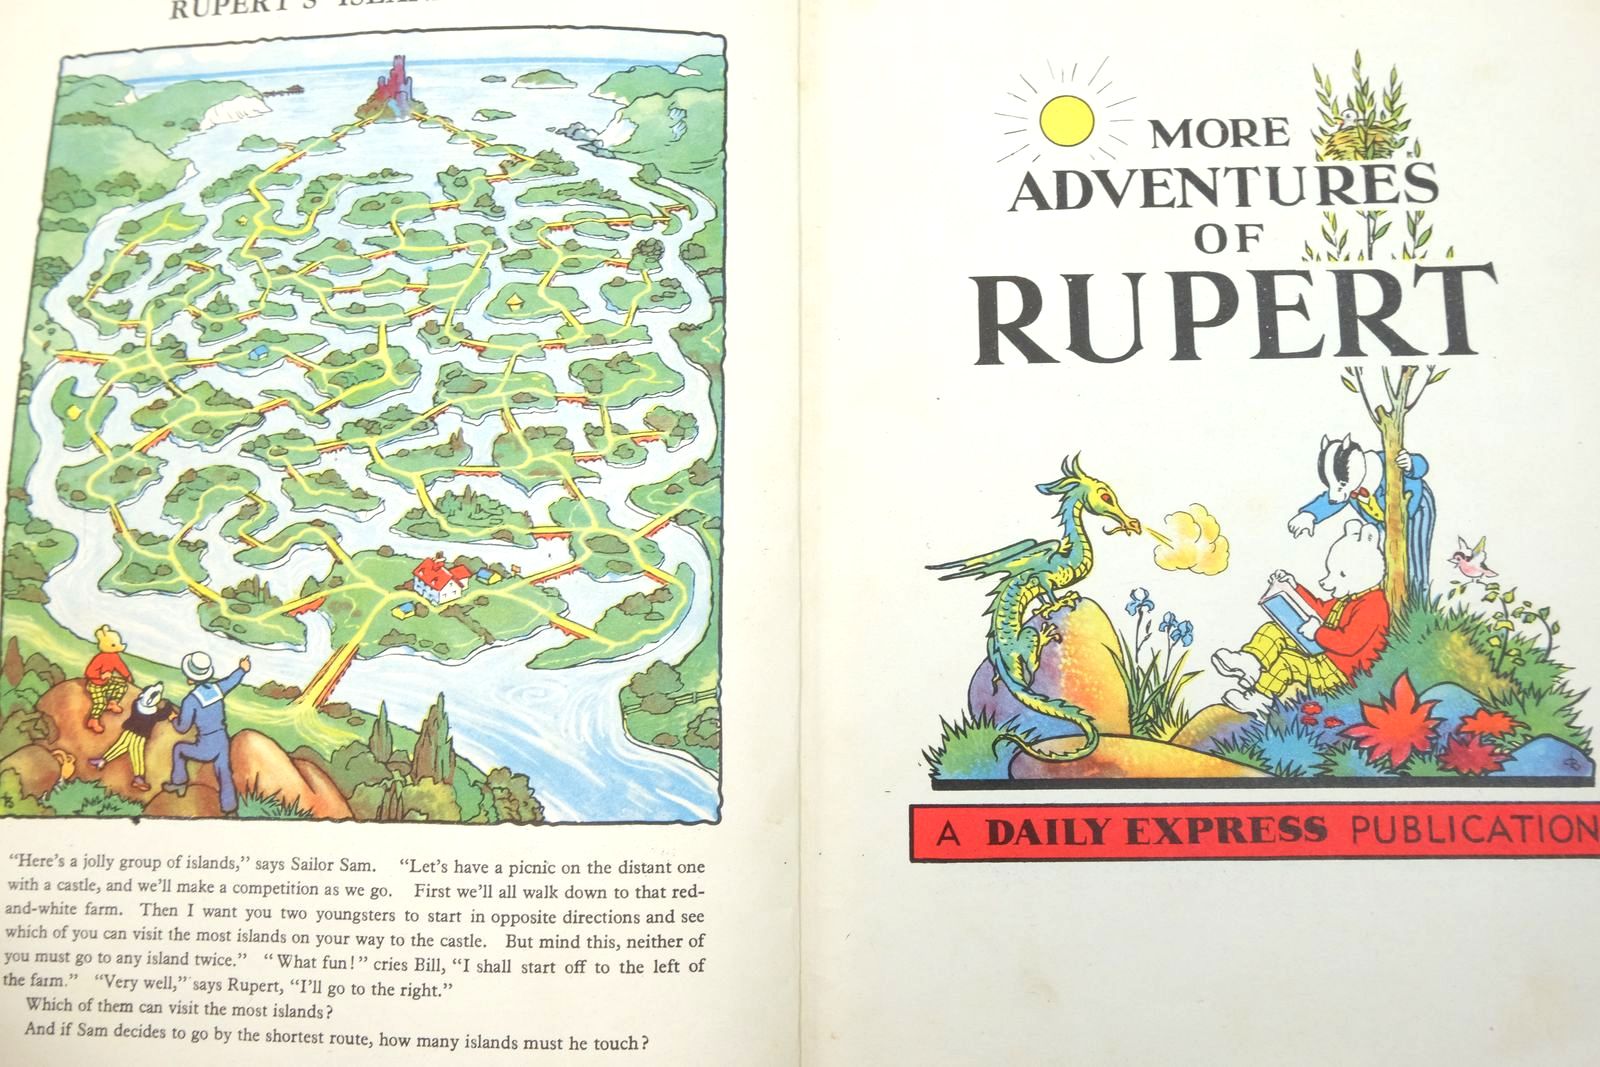 Photo of RUPERT ANNUAL 1947 - MORE ADVENTURES OF RUPERT written by Bestall, Alfred illustrated by Bestall, Alfred published by Daily Express (STOCK CODE: 2136723)  for sale by Stella & Rose's Books